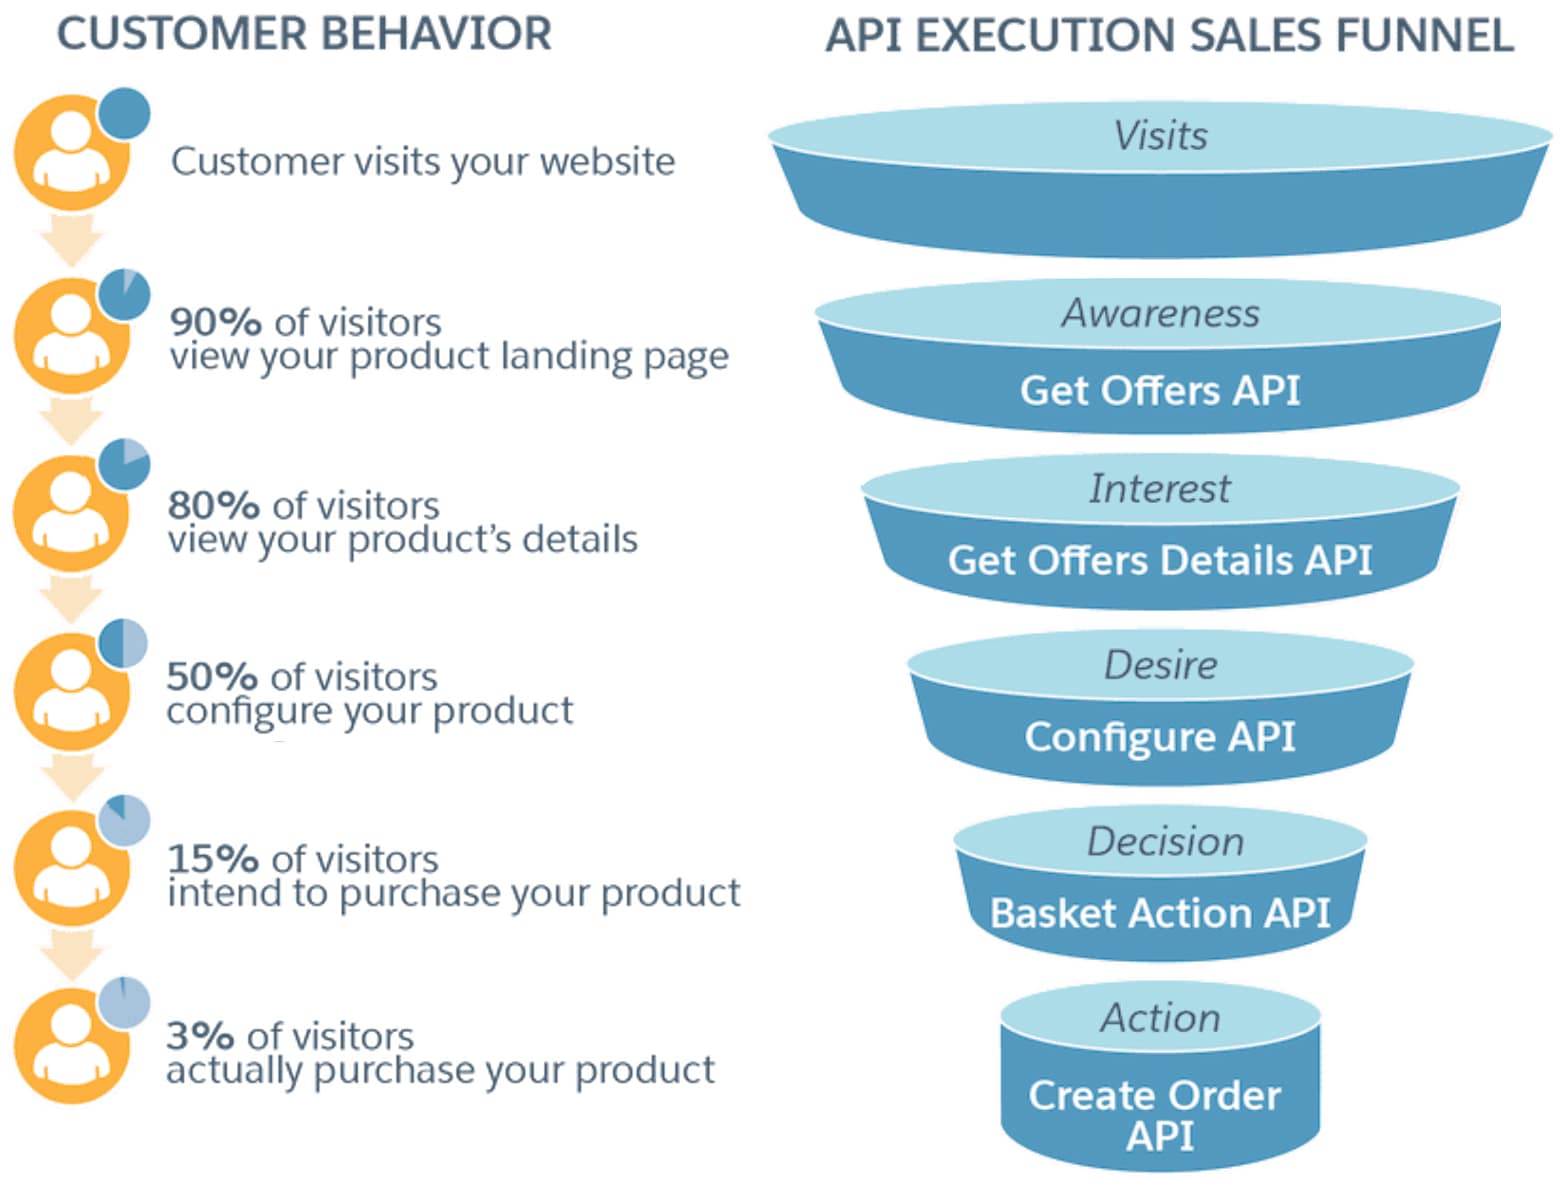 Each customer action corresponds to a cache management API. Viewing products is the Get Offers API. Viewing product details is the Get Offer Details API. Configuring a product is the Configure API. Intent to purchase is the Basket Action API. Purchasing is the Create Order API.